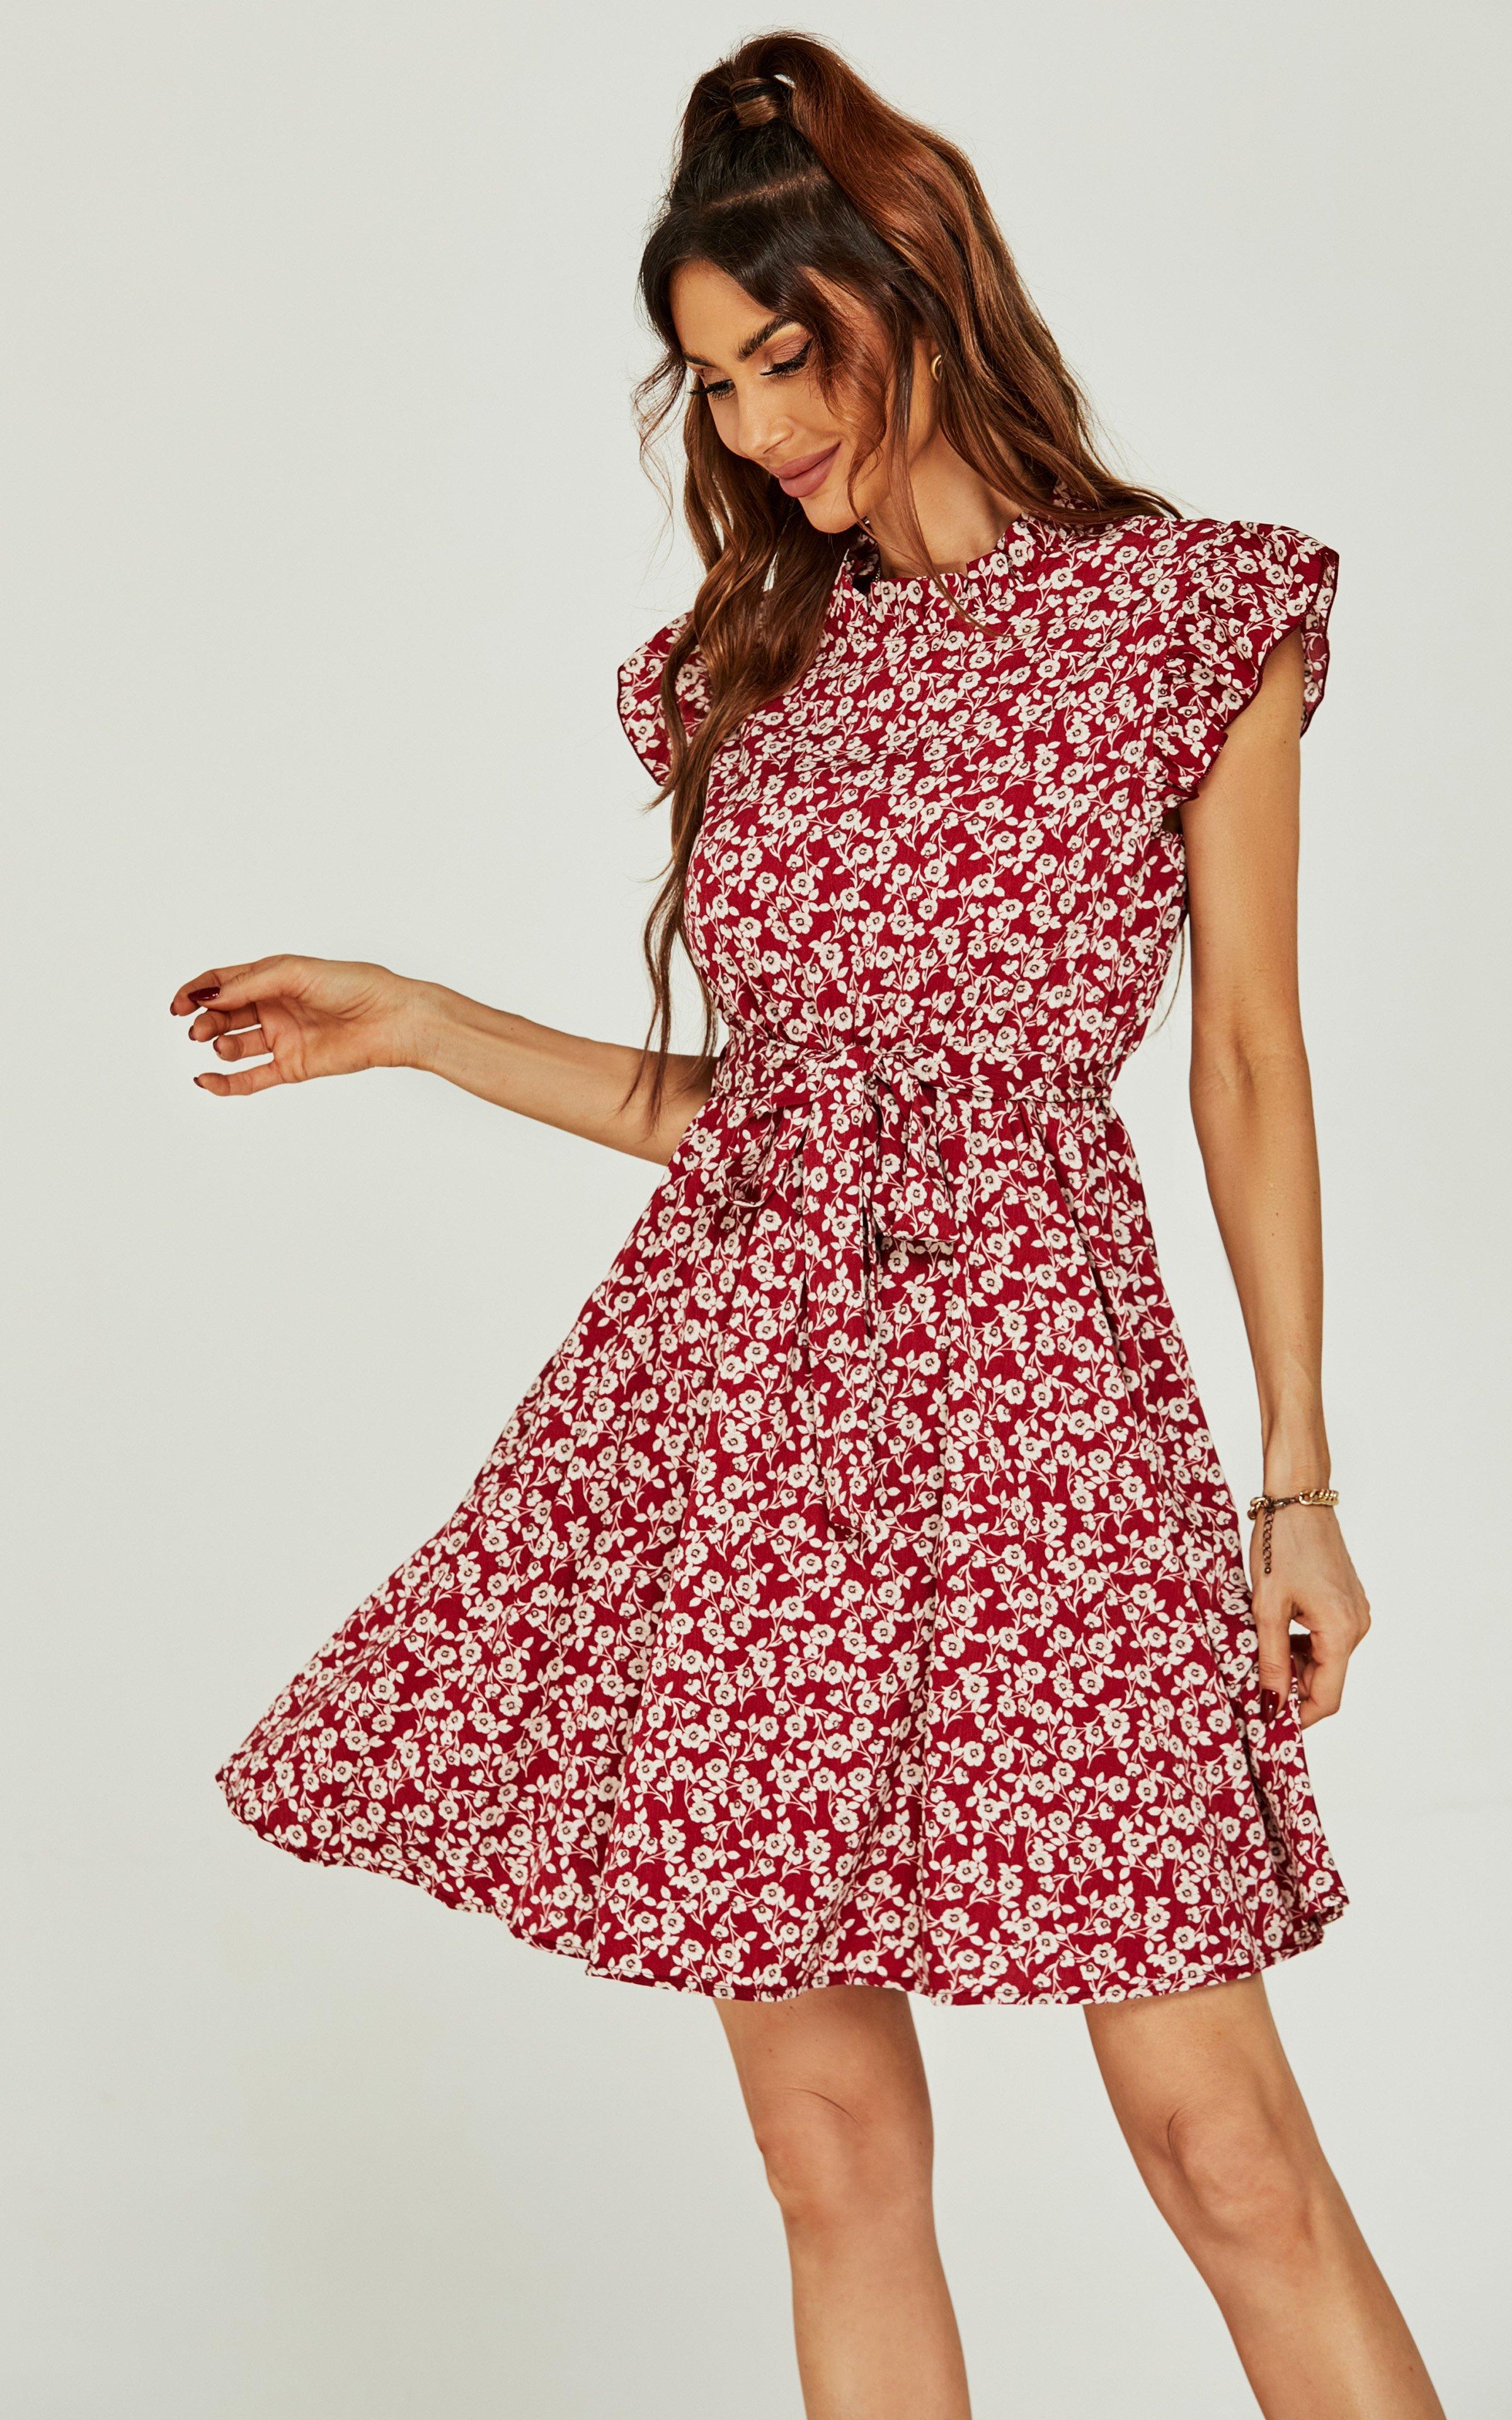 Summer Floral Print Ruffle Sleeve Mini Dress In Red